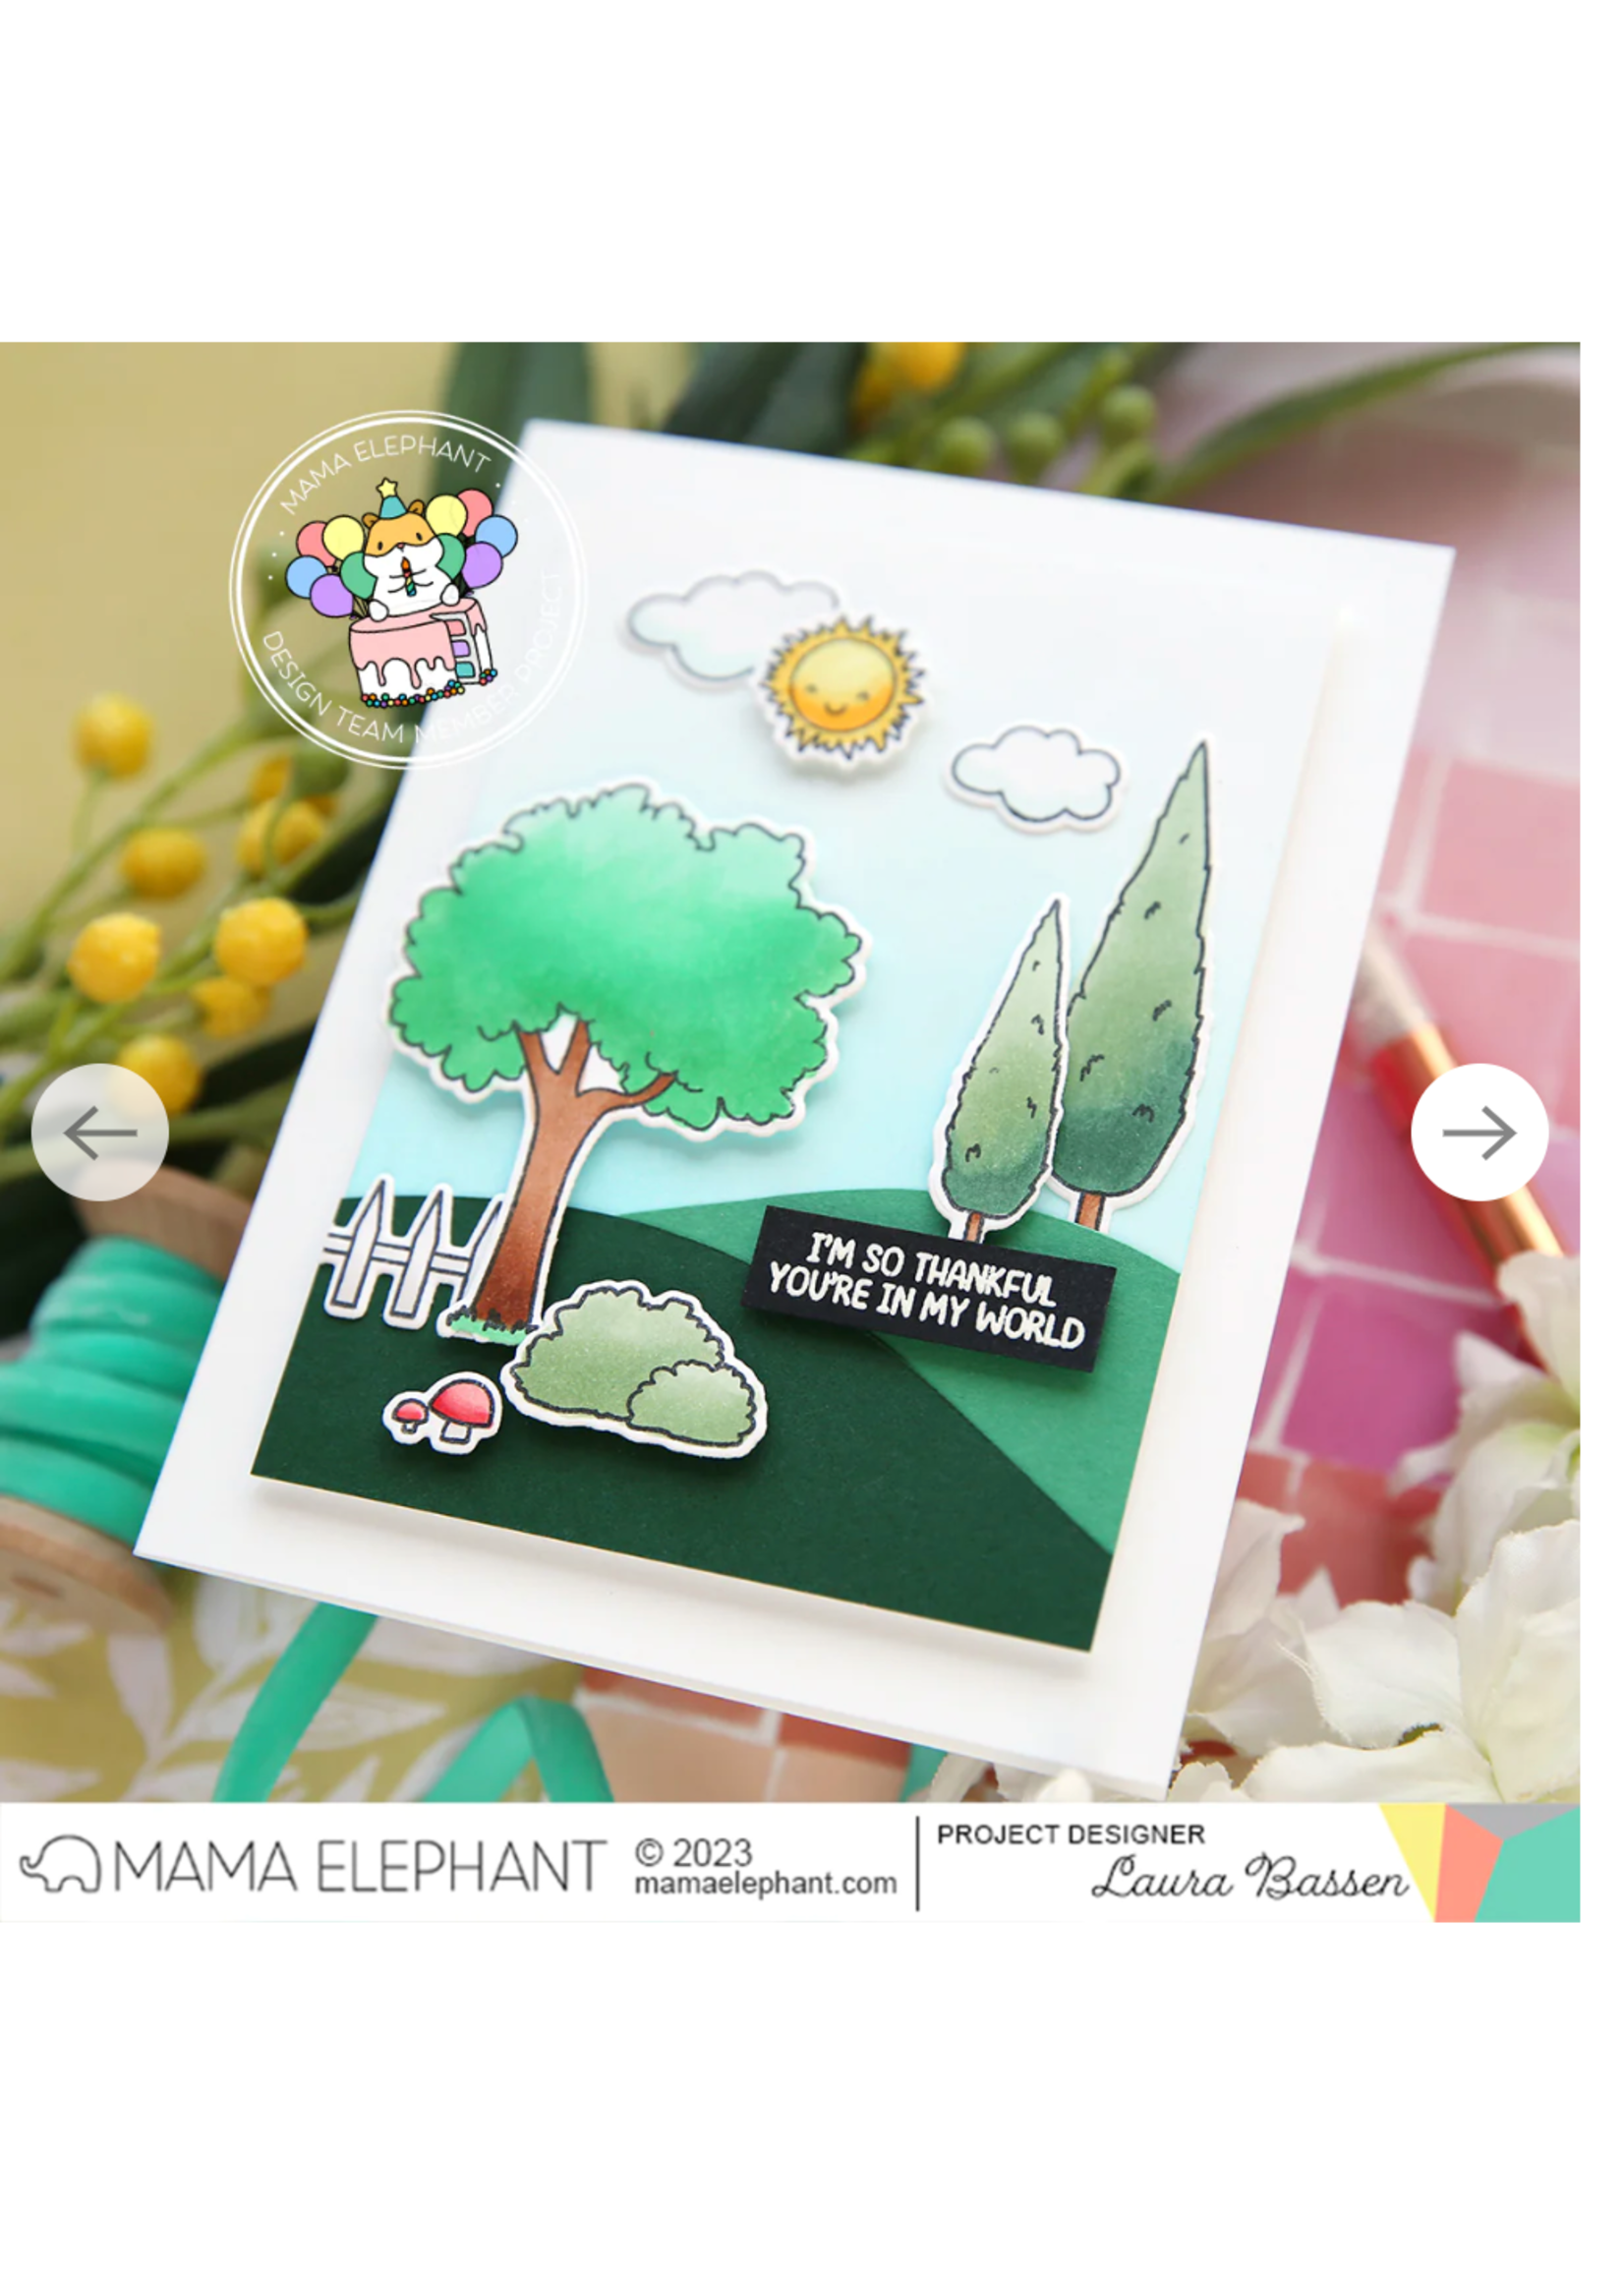 Mama Elephant A BetterPlace stamps